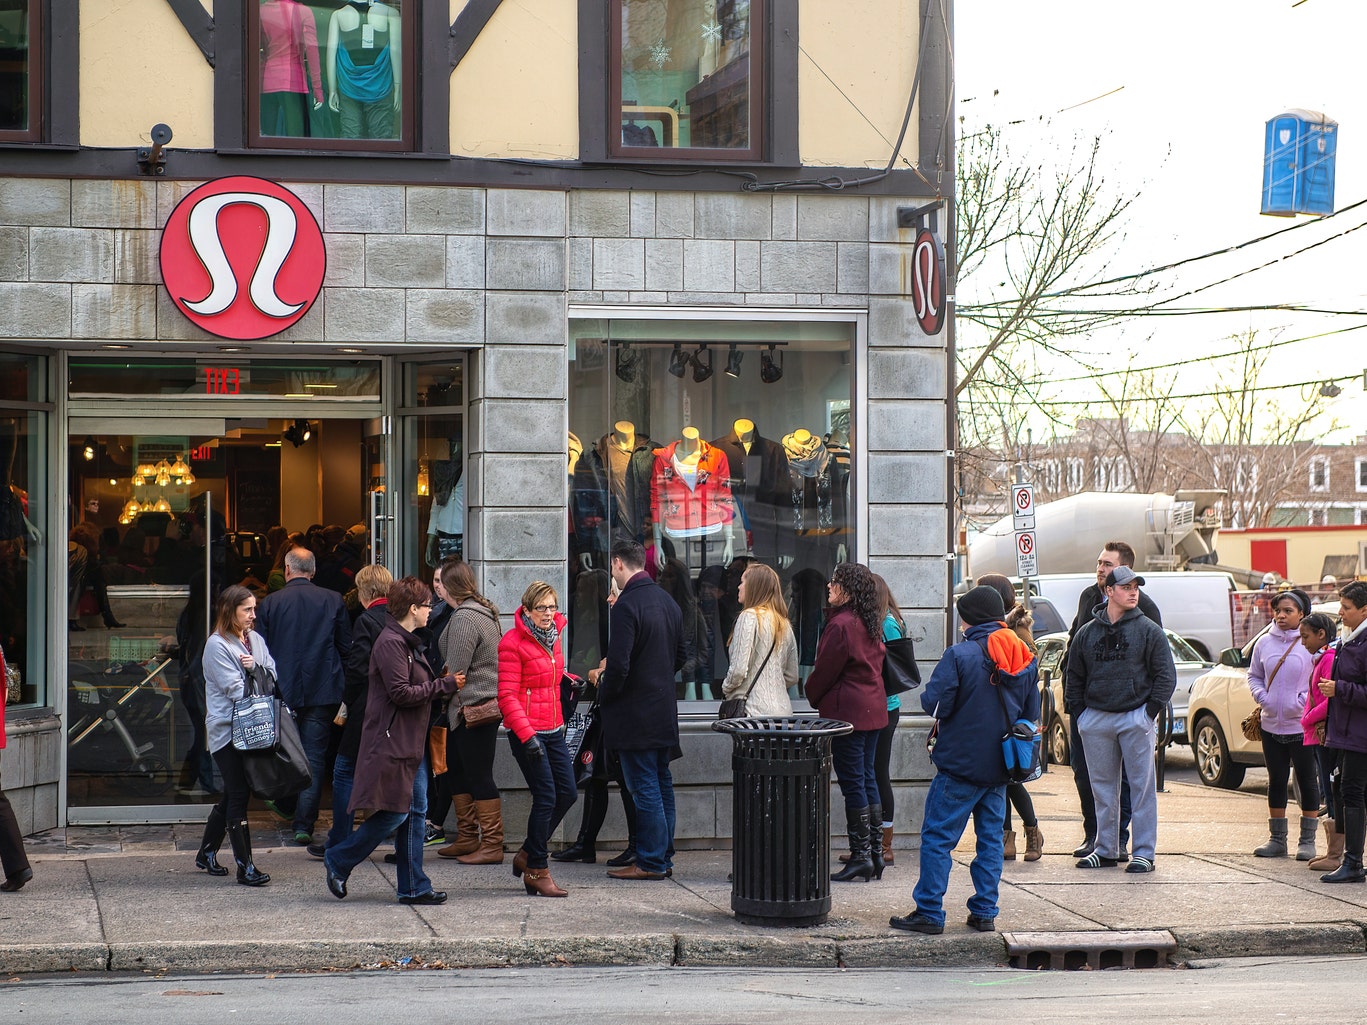 Lululemon Athletica Talked Growth, But What About Ability to Execute?